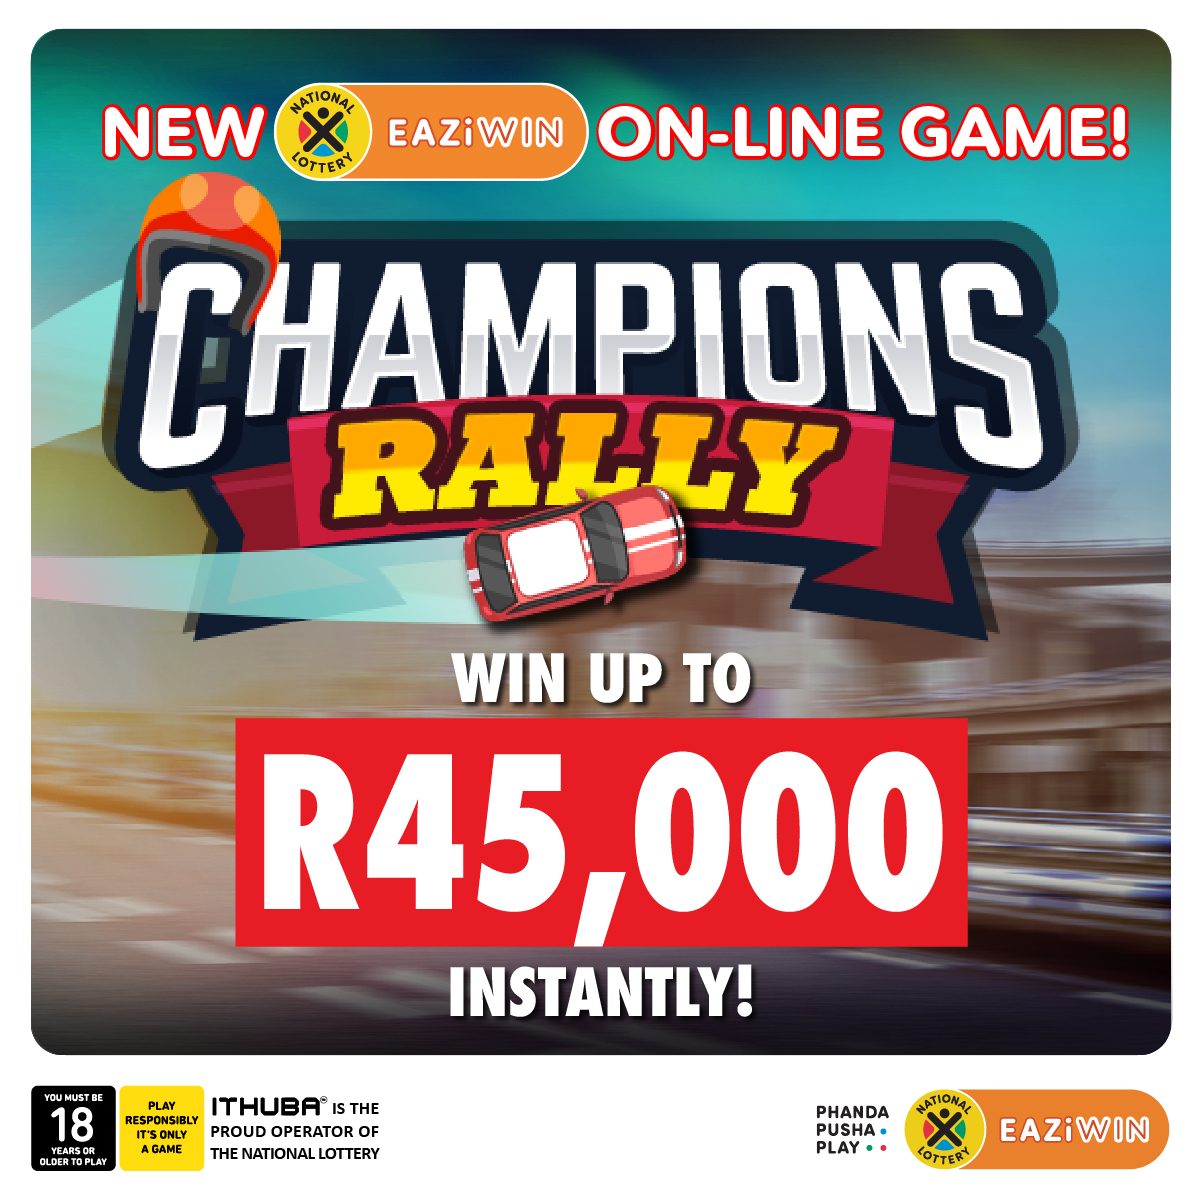 Gear up & stand a chance to win R45,000 when you play #EAZIWIN’S NEW #CHAMPIONSRALLY game! Log into nationallottery.co.za, or the Mobile App to play. PLAY NOW!!!